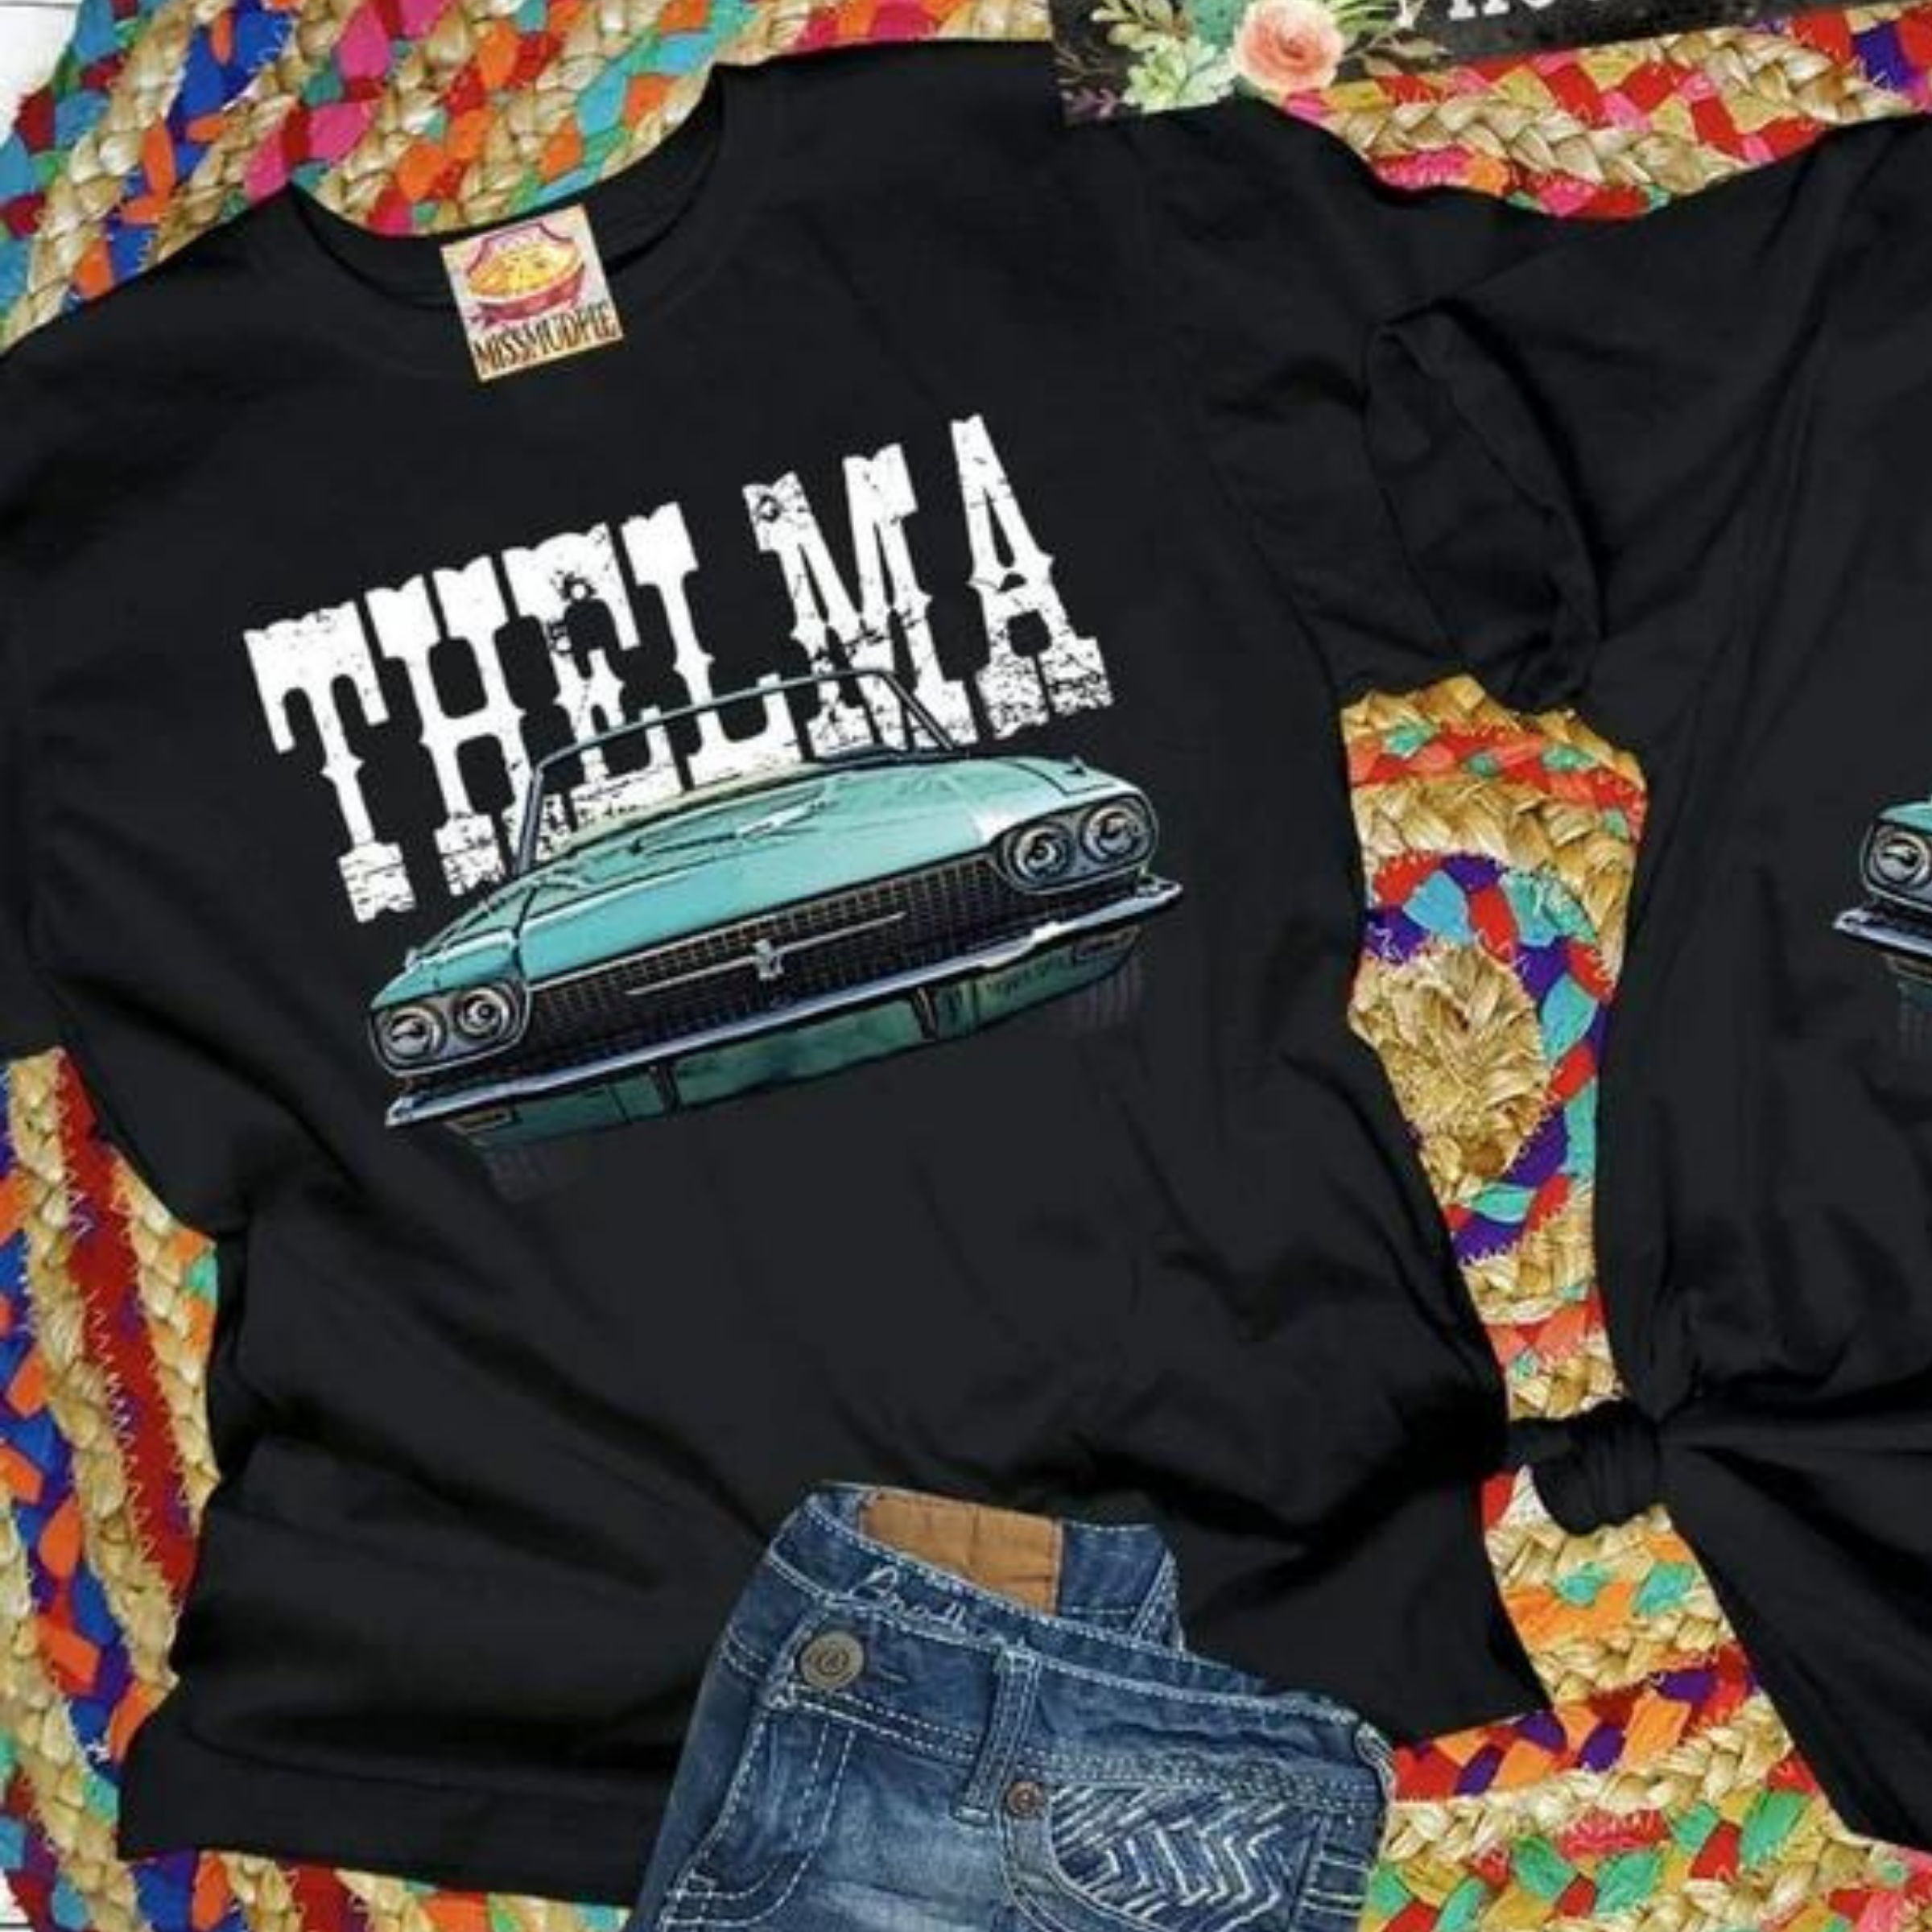 A black tee shirt folded into a rectangle exposing the vintage car graphic that says "Thelma" above. Pictured with a turquoise necklace on a serape rug.